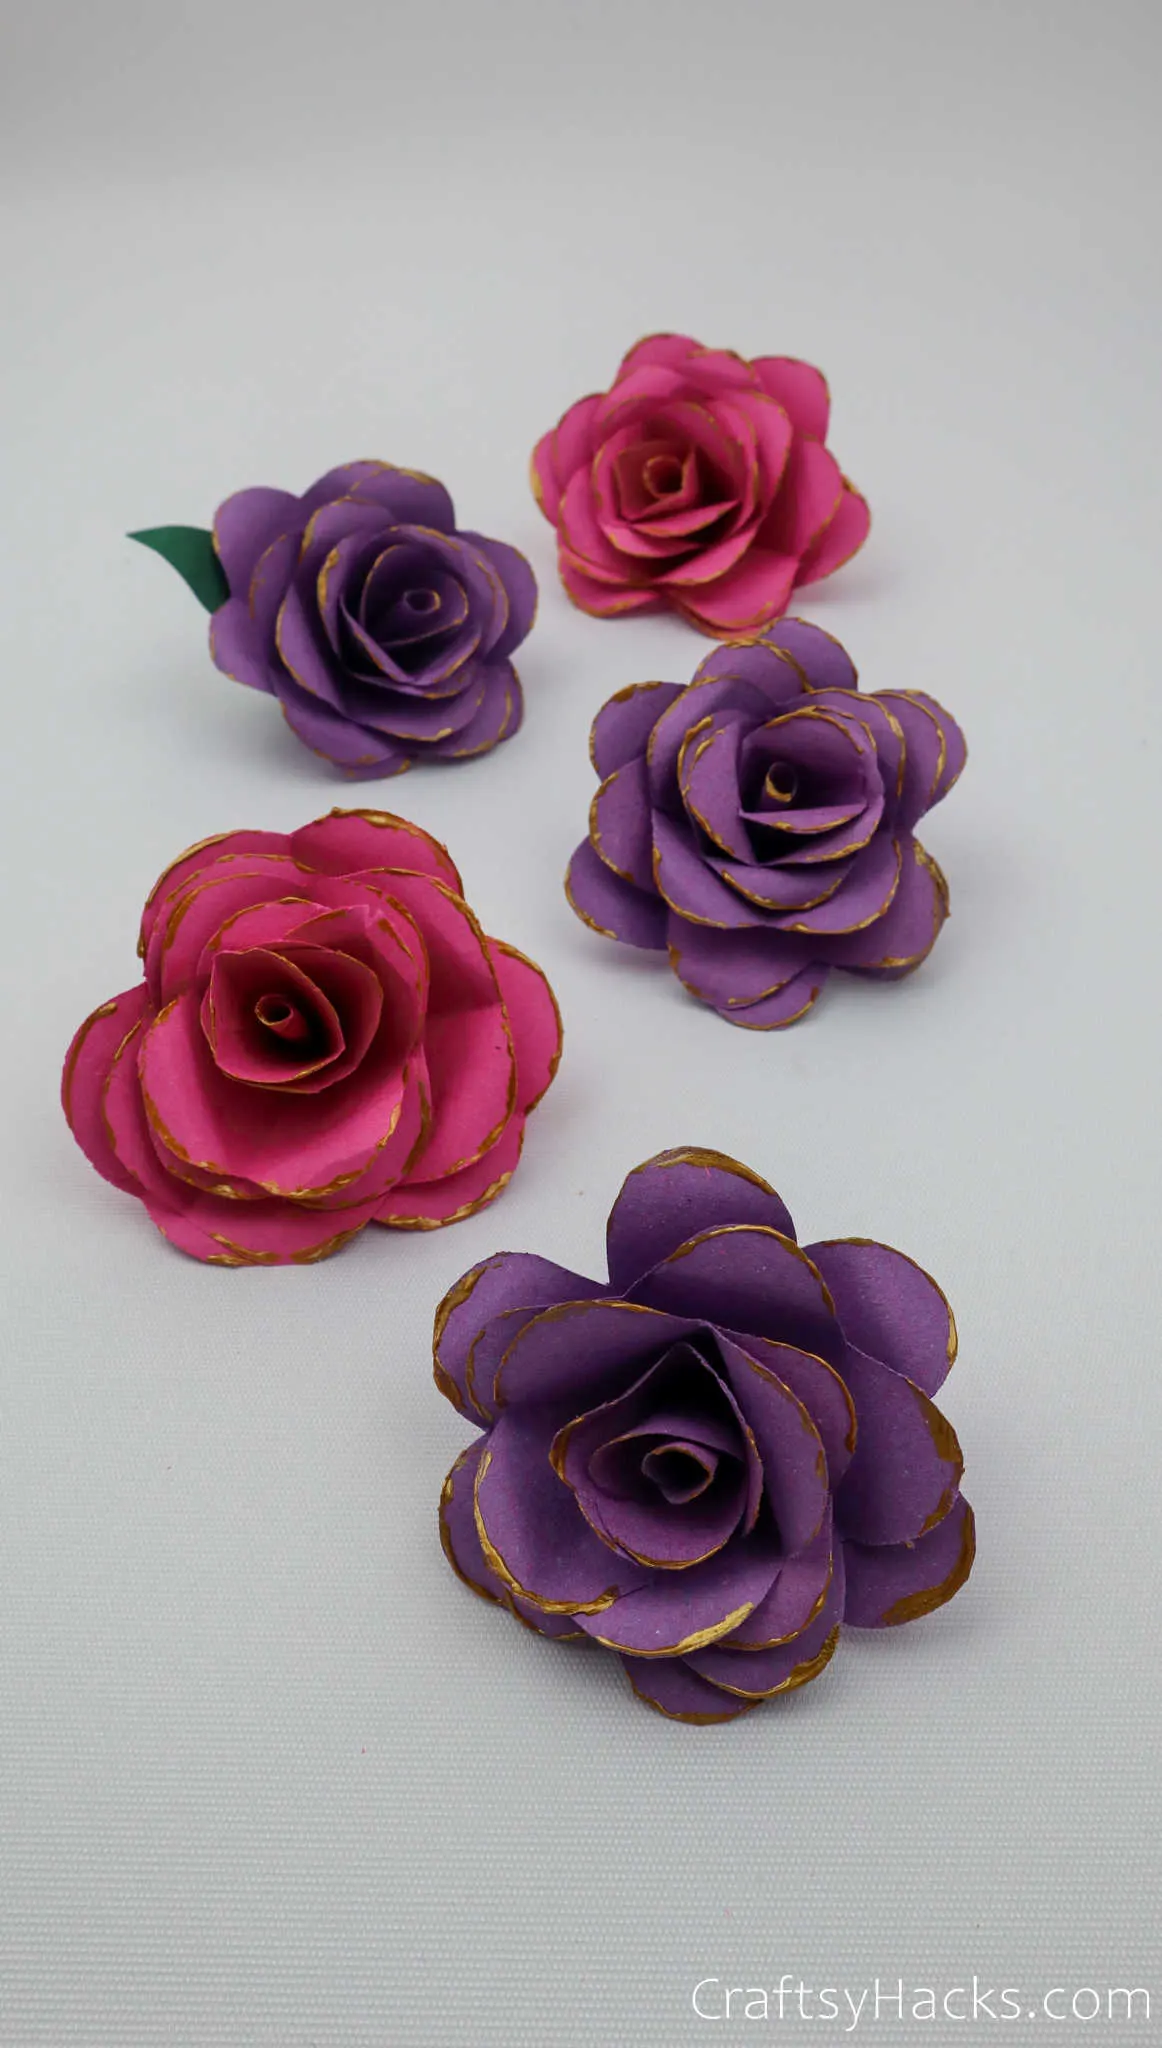 5 finished paper flowers